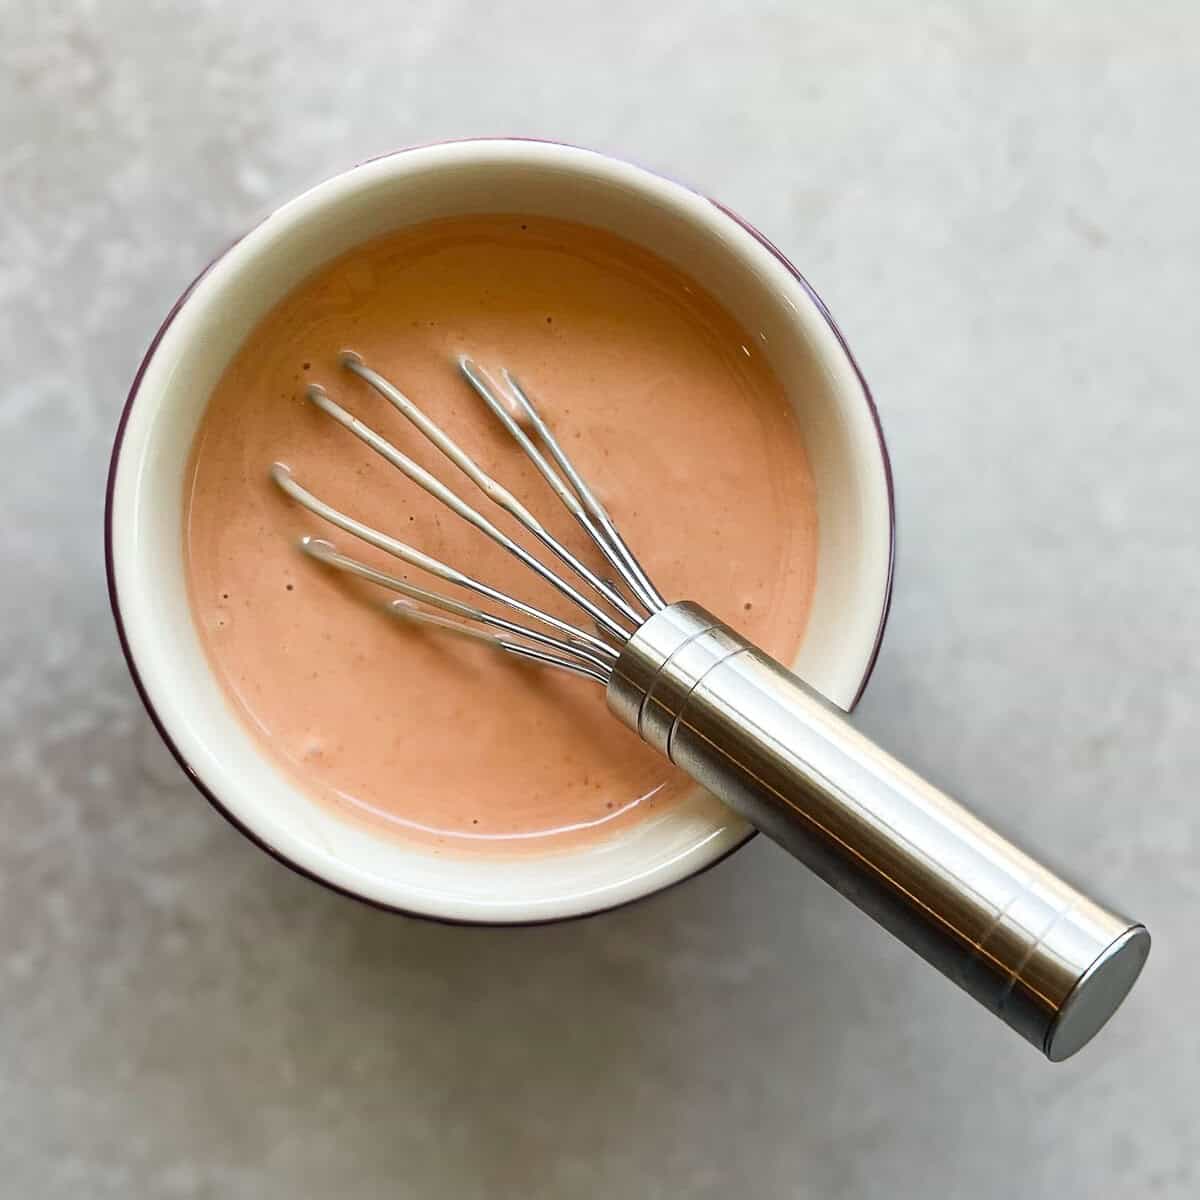 salmon colored sauce in a small bowl with a metal whisk.